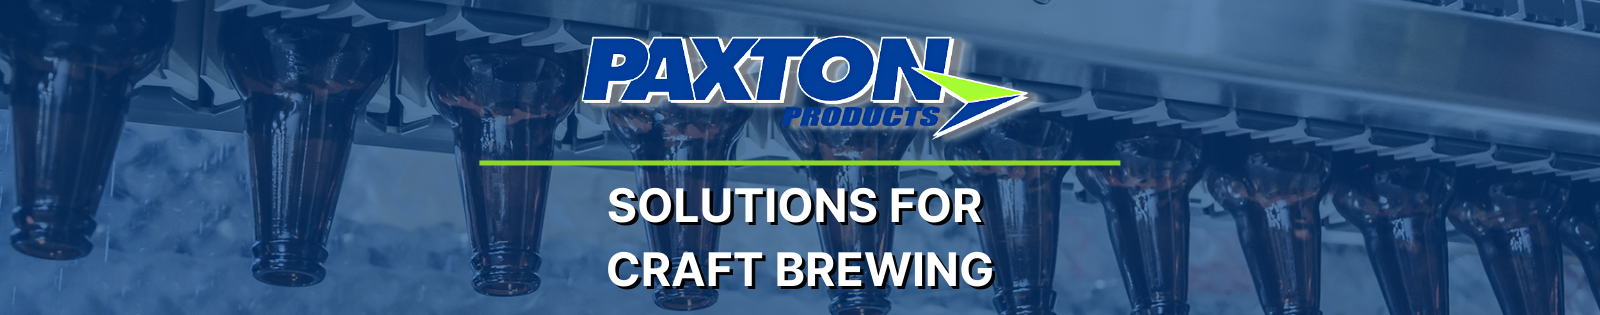 Paxton Products Drying and Blow Off Solutions for Craft Brewing 